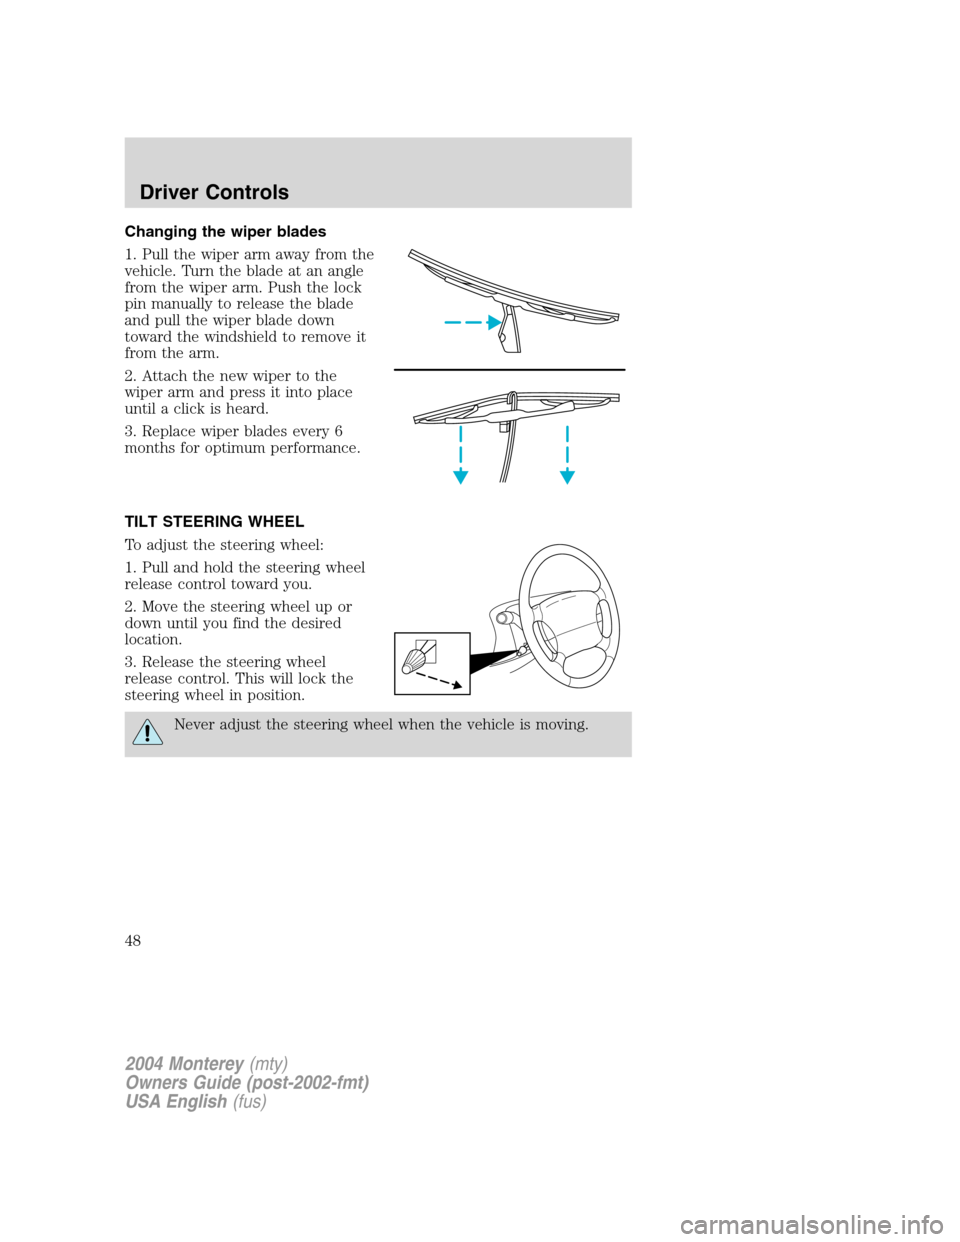 Mercury Monterey 2004  Owners Manuals Changing the wiper blades
1. Pull the wiper arm away from the
vehicle. Turn the blade at an angle
from the wiper arm. Push the lock
pin manually to release the blade
and pull the wiper blade down
towa